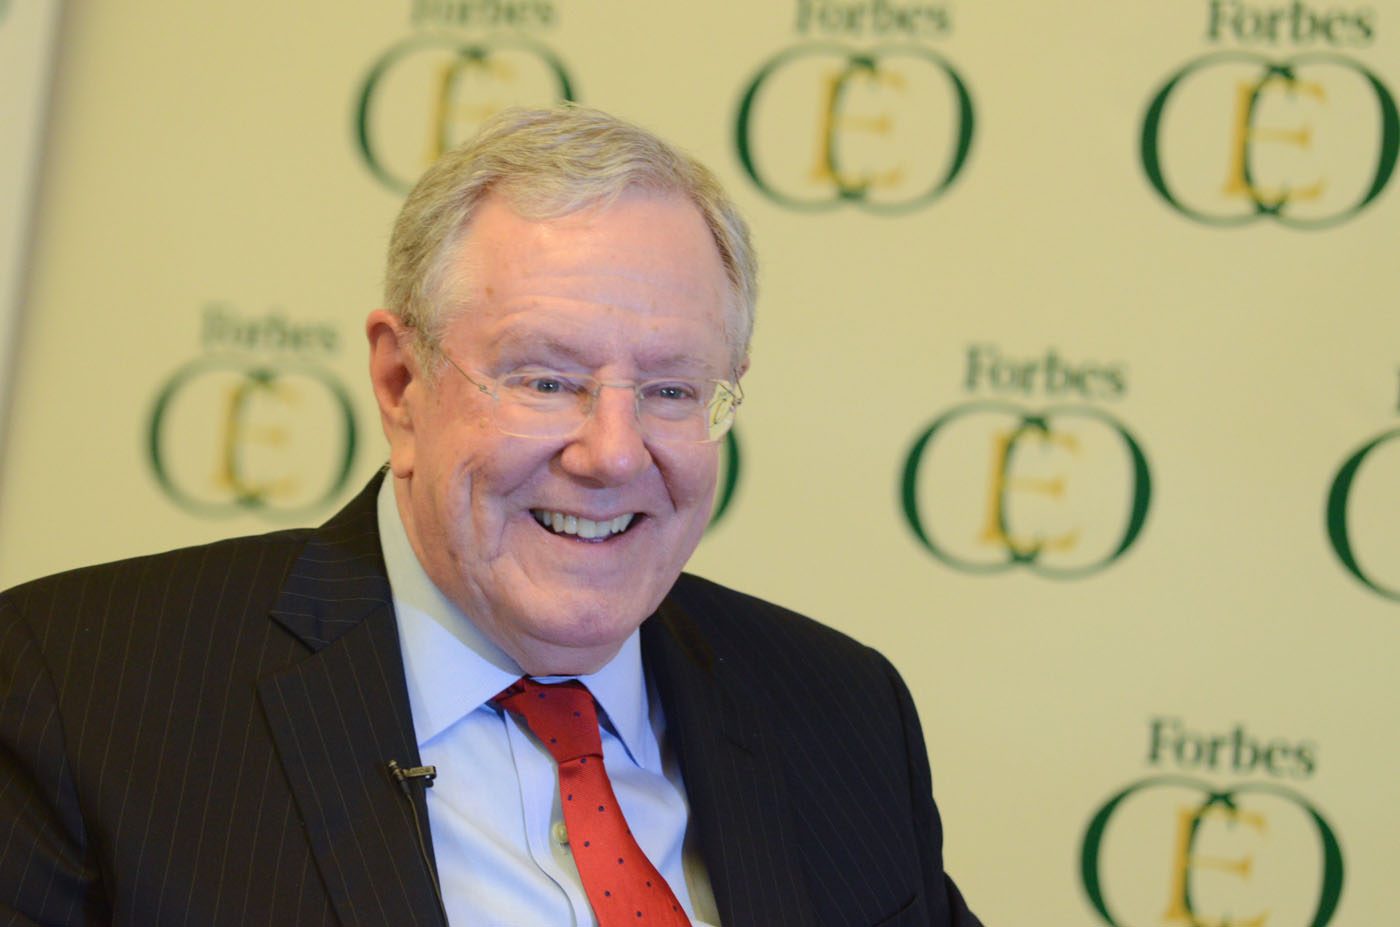 Steve Forbes: Blend old and new media, make readers happy